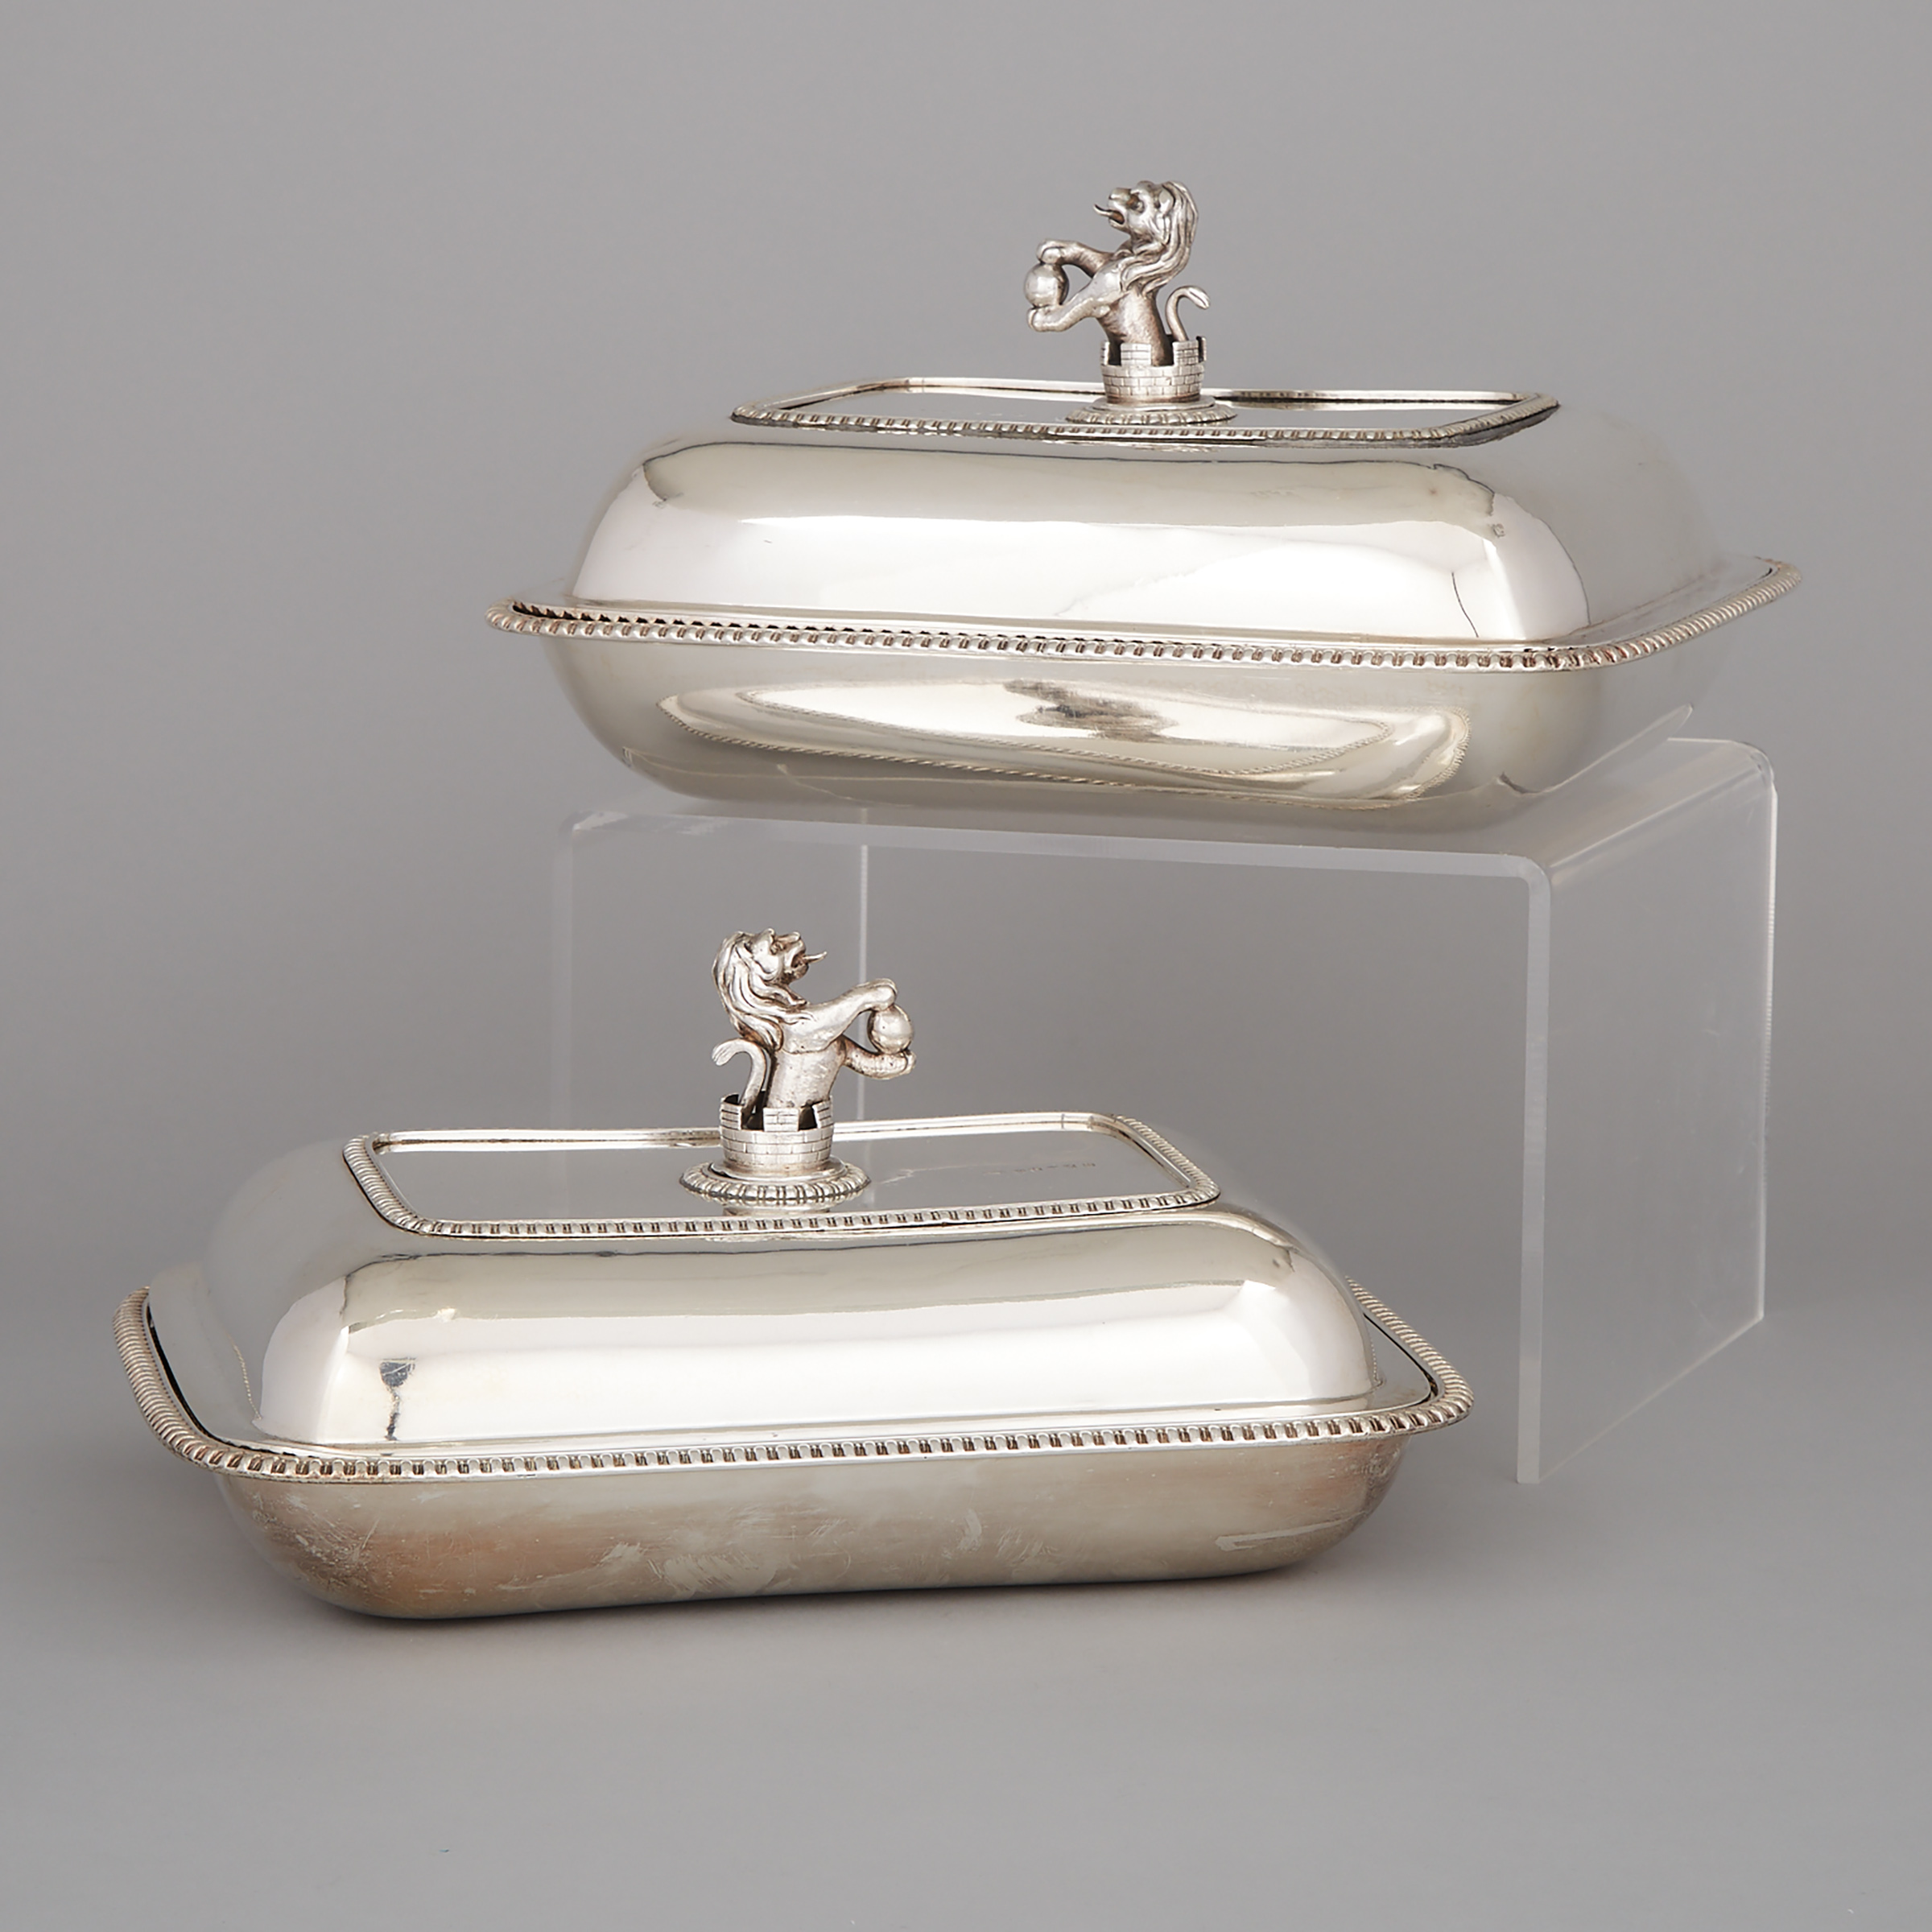 Pair of George III Irish Silver Covered Entrée Dishes, Gustavus Byrne for William Law, Dublin, 1812